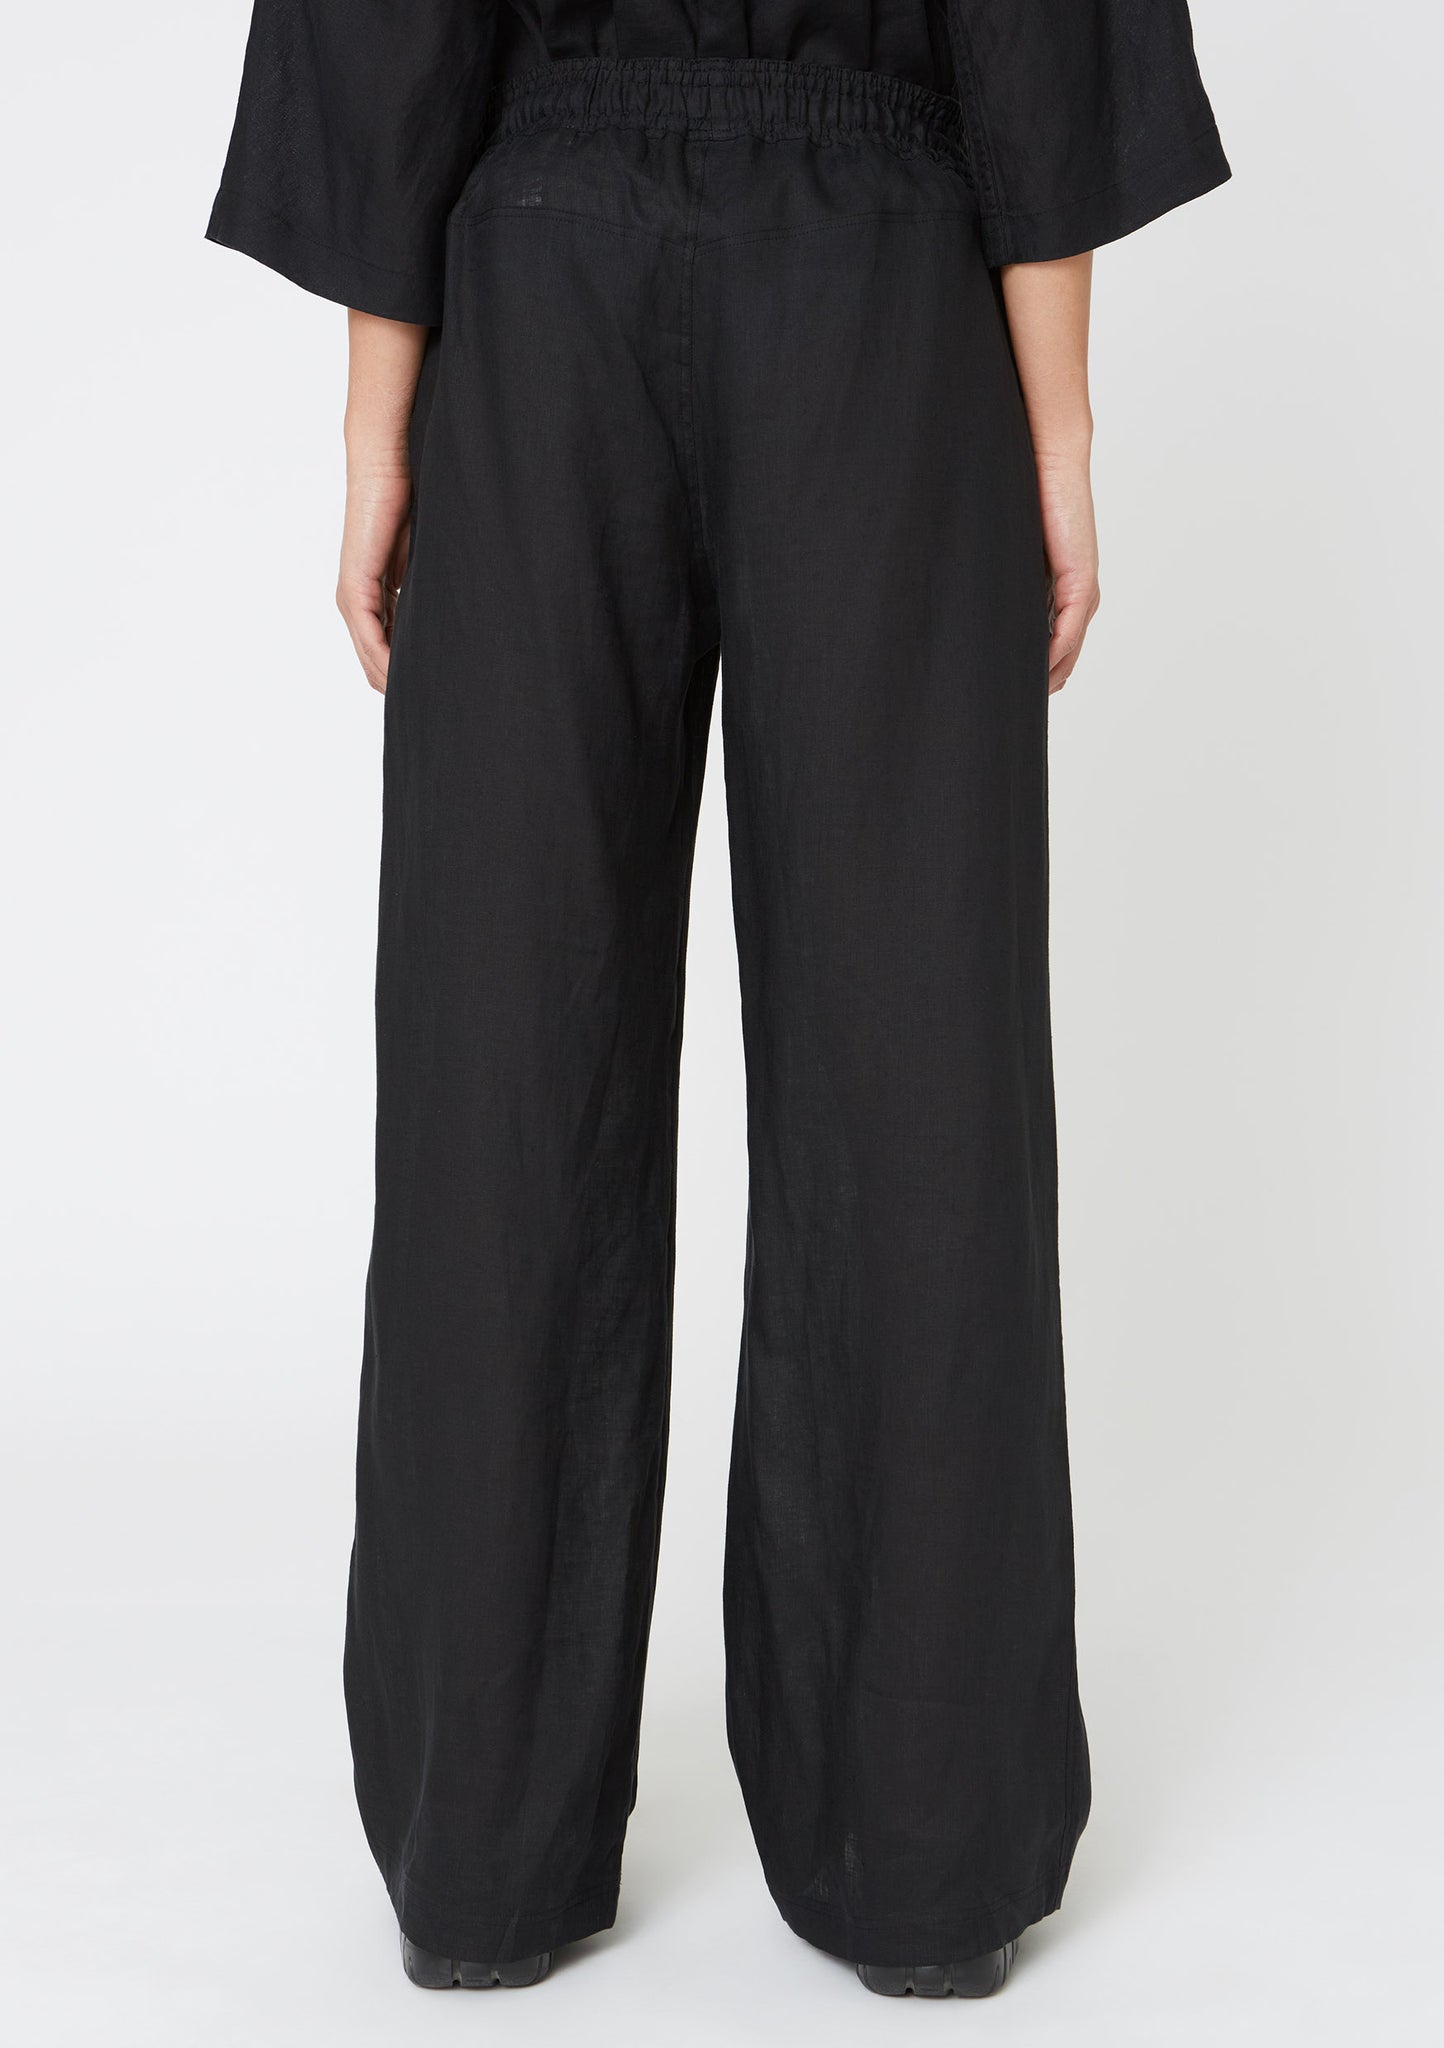 Dance Trousers in black by Hope